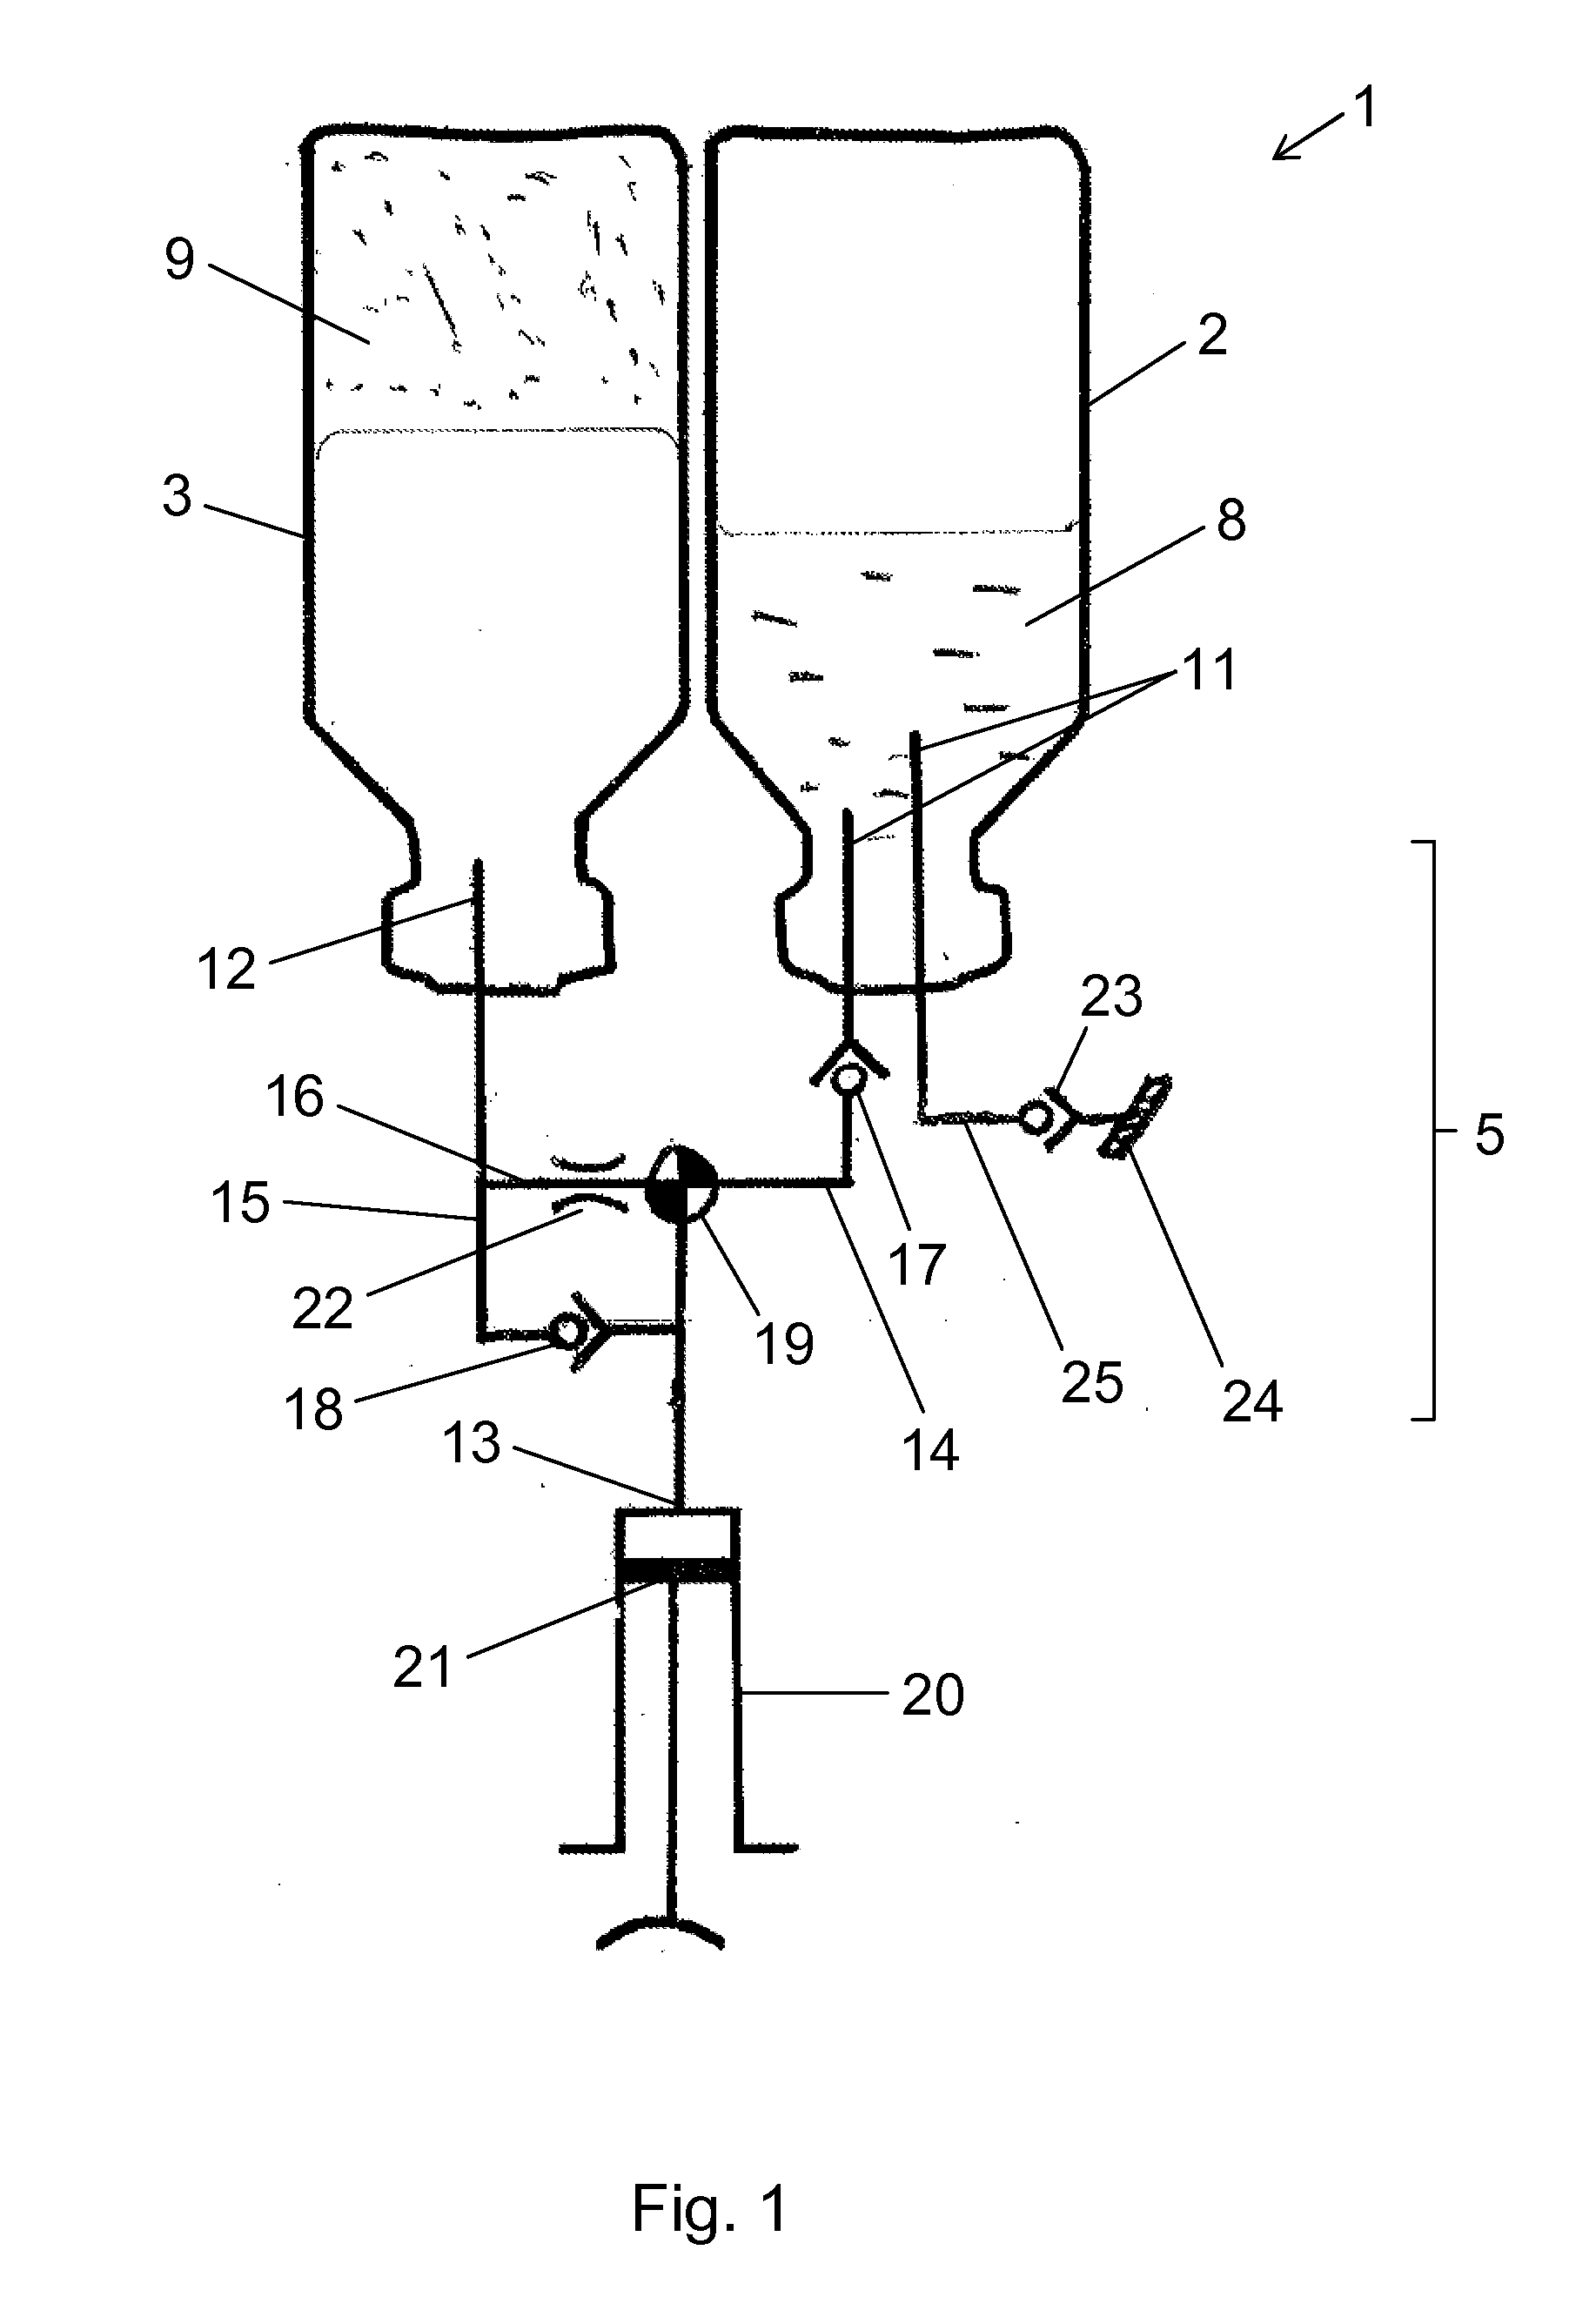 System for reconstitution of a powdered drug